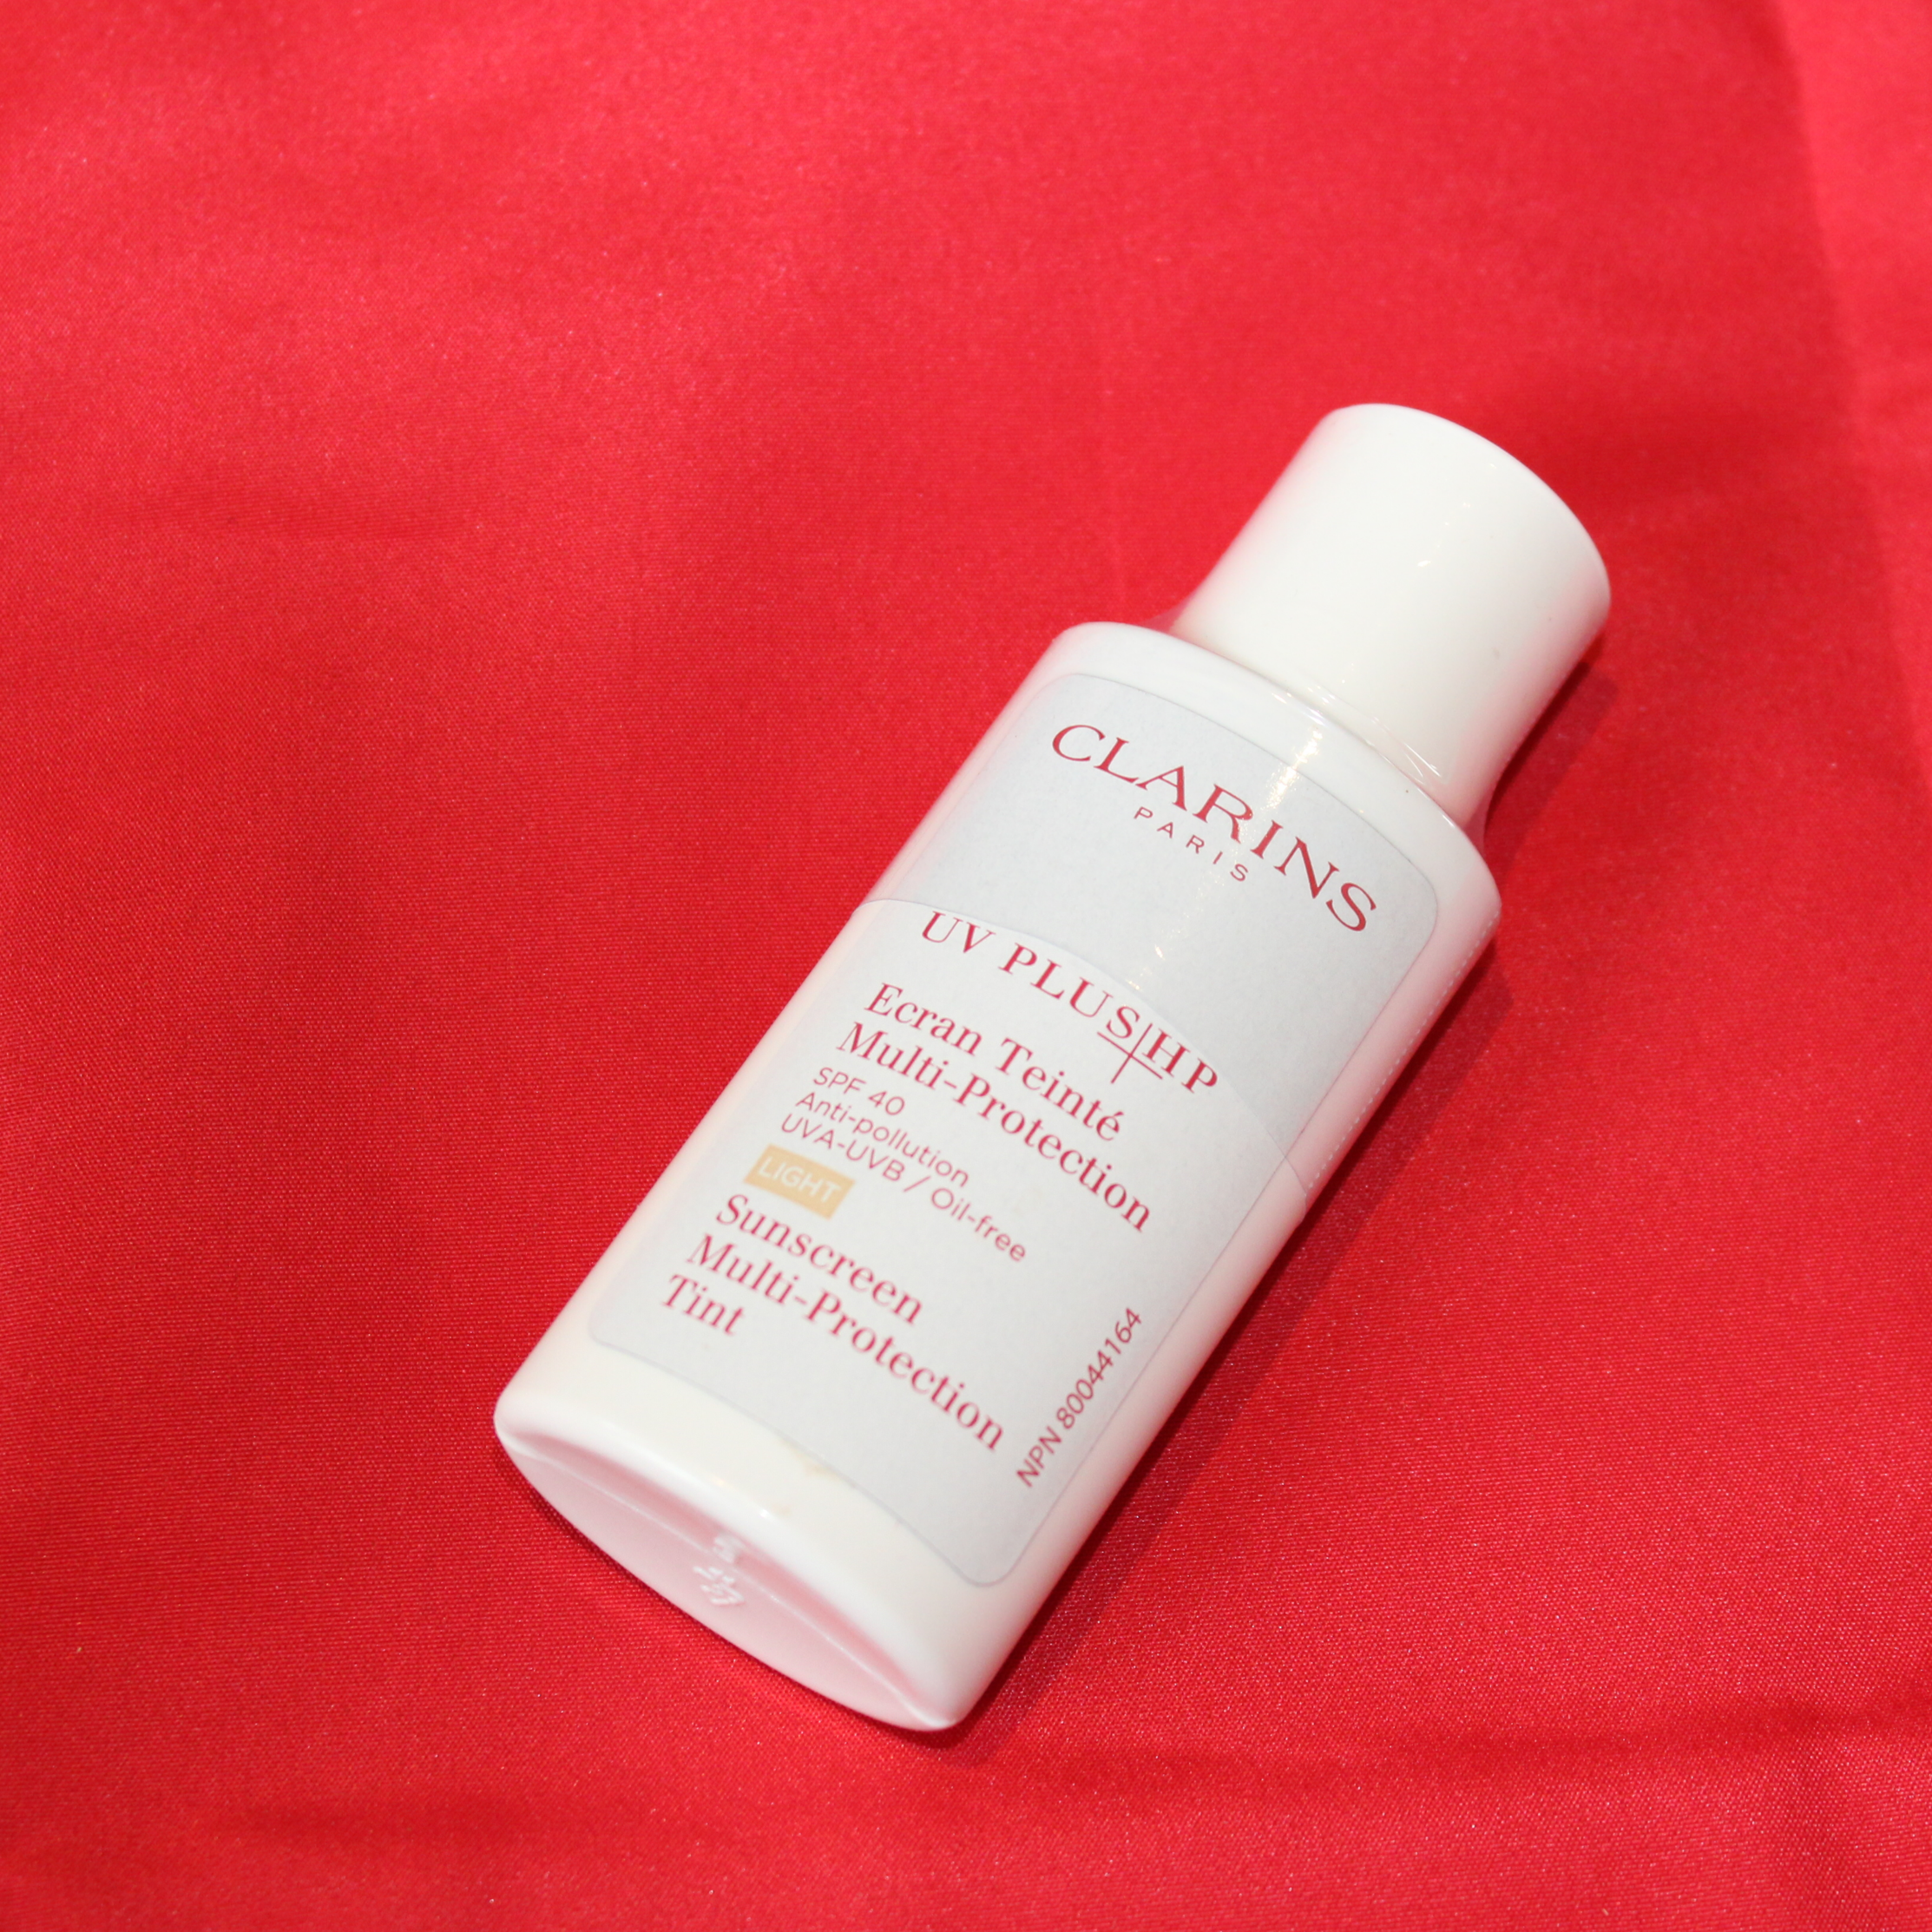 Clarins | UV Plus HP Day Sunscreen protection